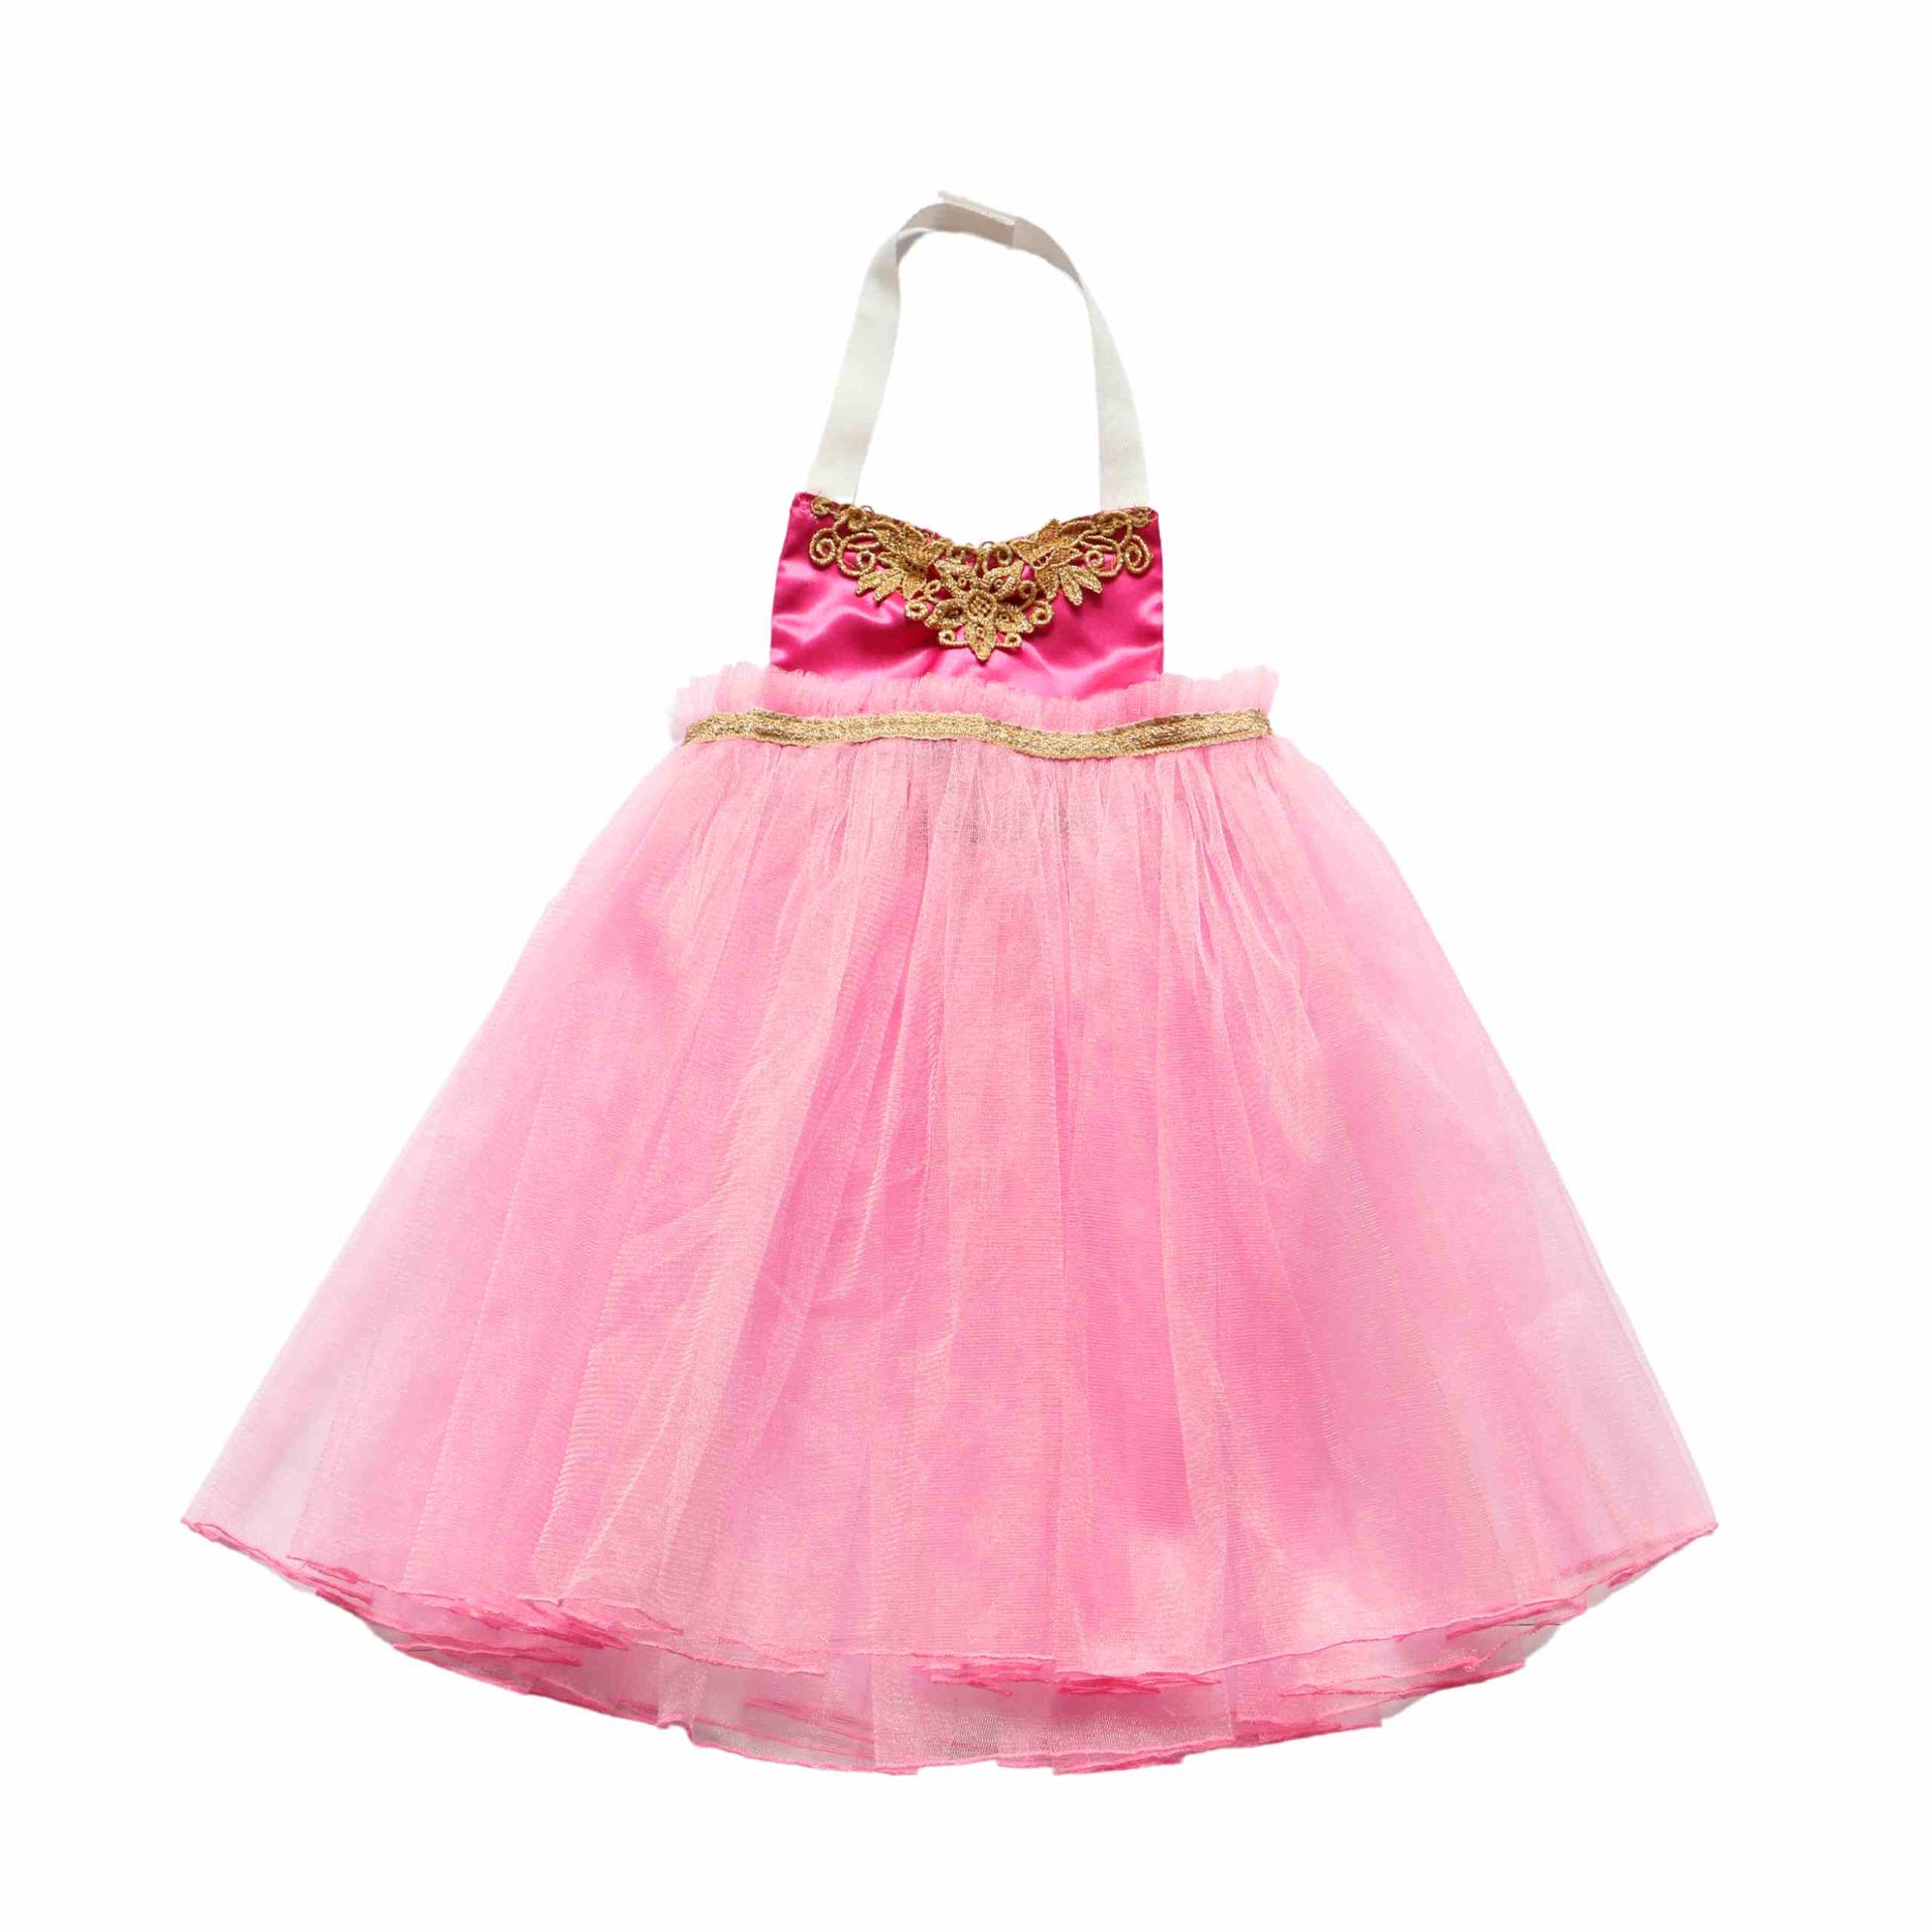 a little girl wearing a pink dress with a gold bow